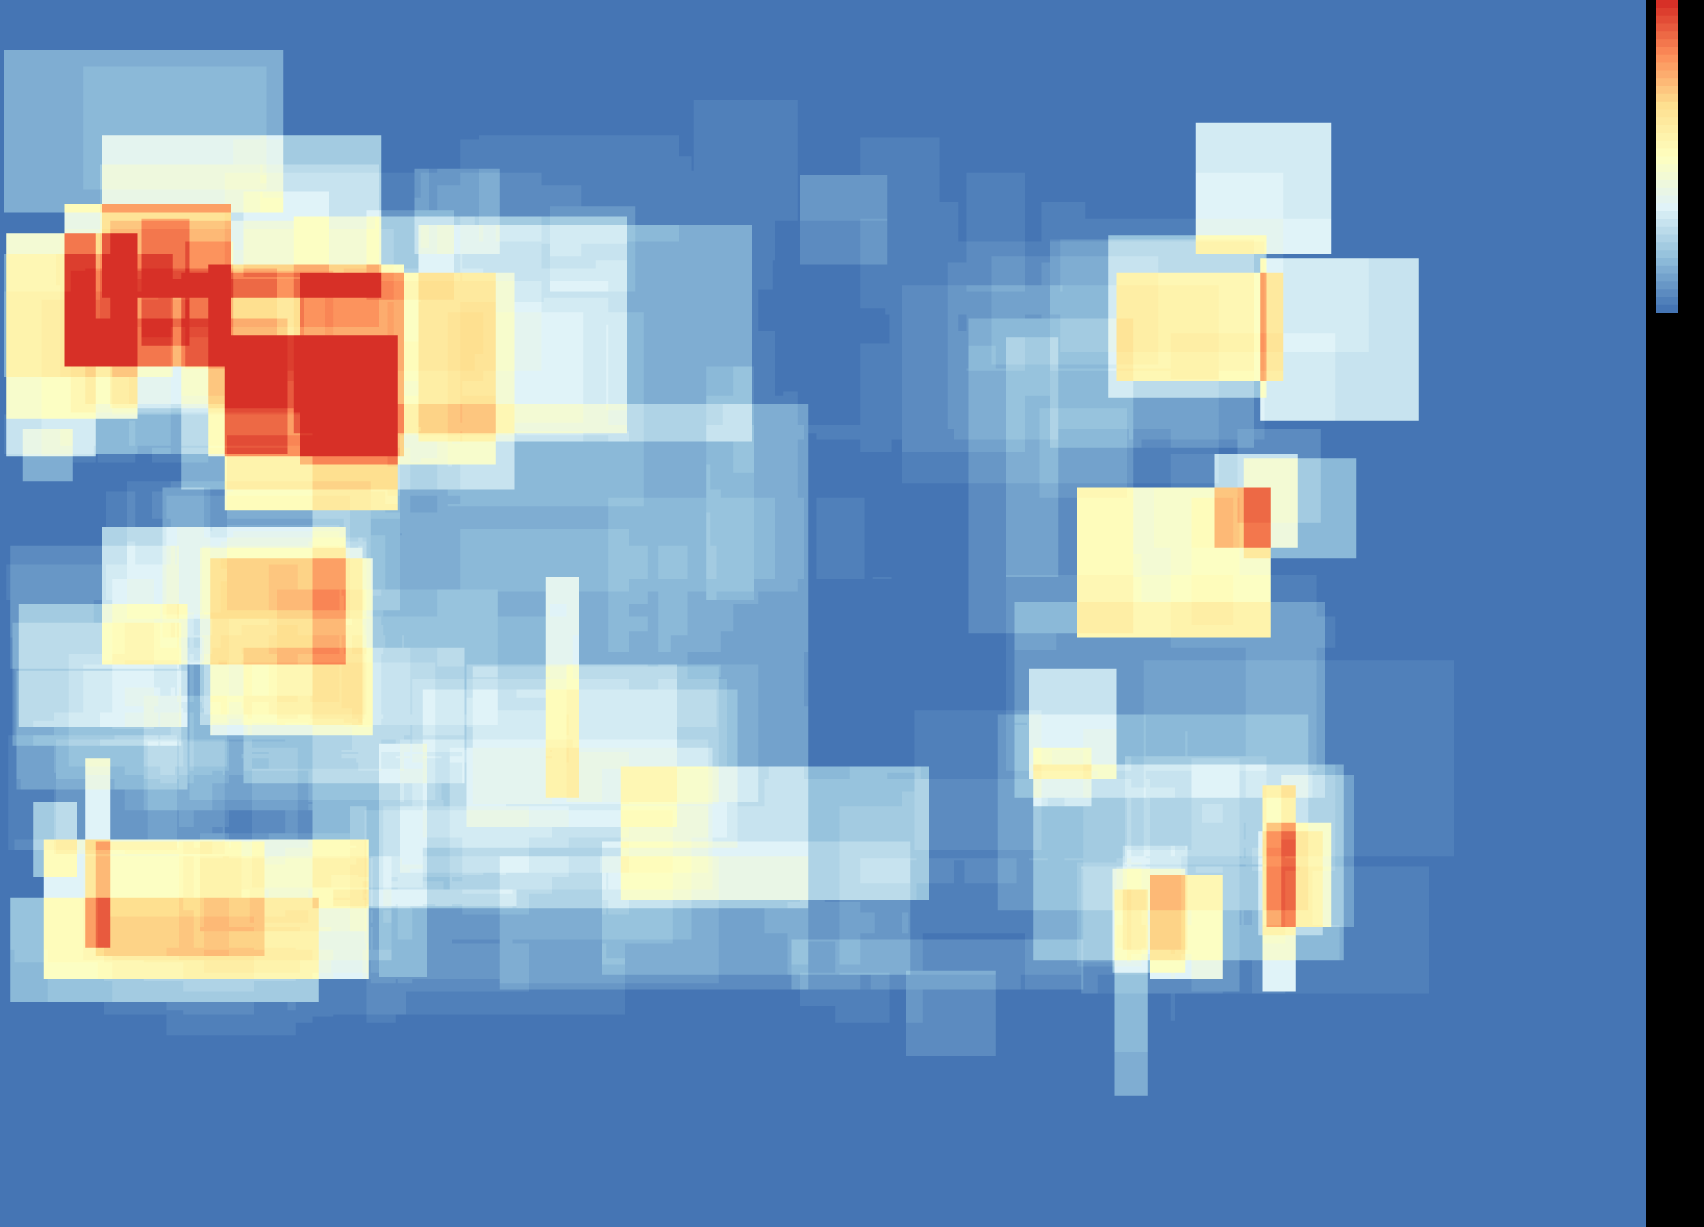 occlusion-heatmap.png